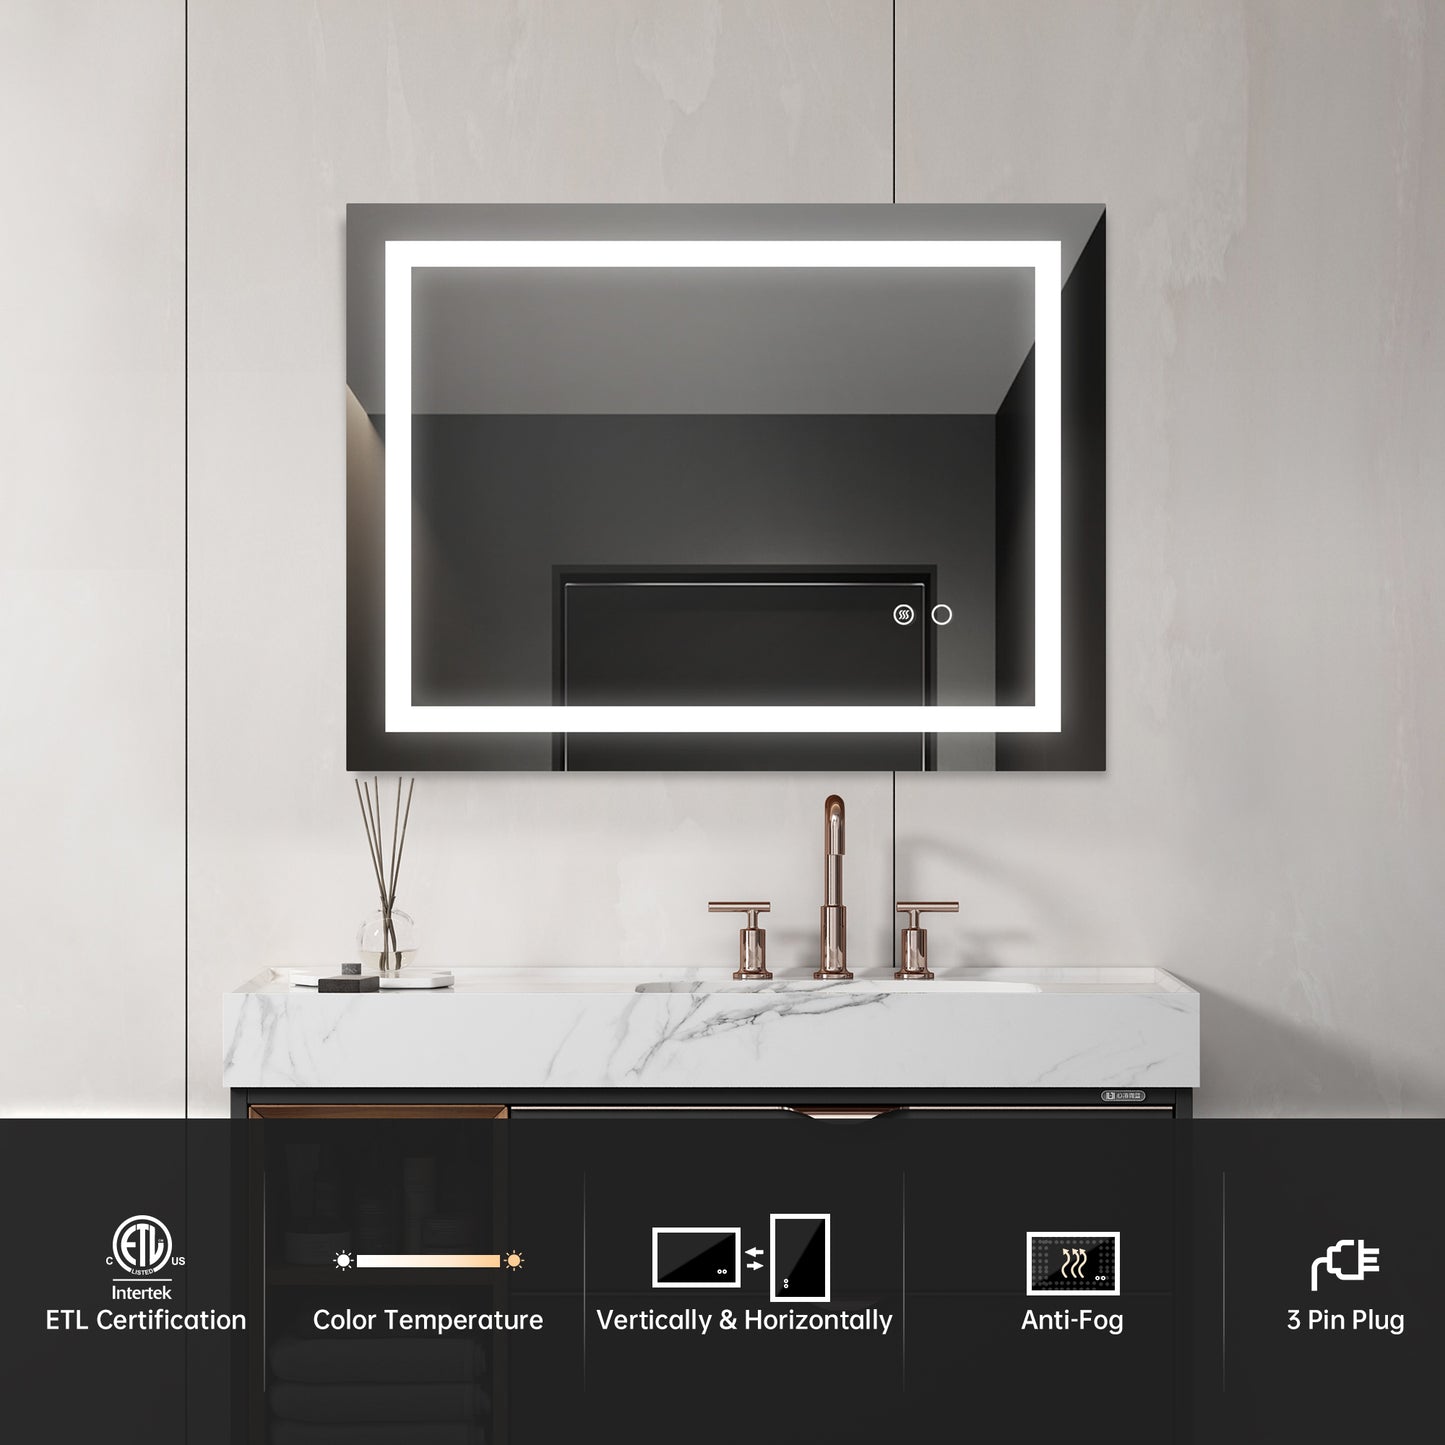 32x 24Inch LED Mirror Bathroom Vanity Mirrors with Lights, Wall Mounted Anti-Fog Memory Large Dimmable Front Light Makeup Mirror